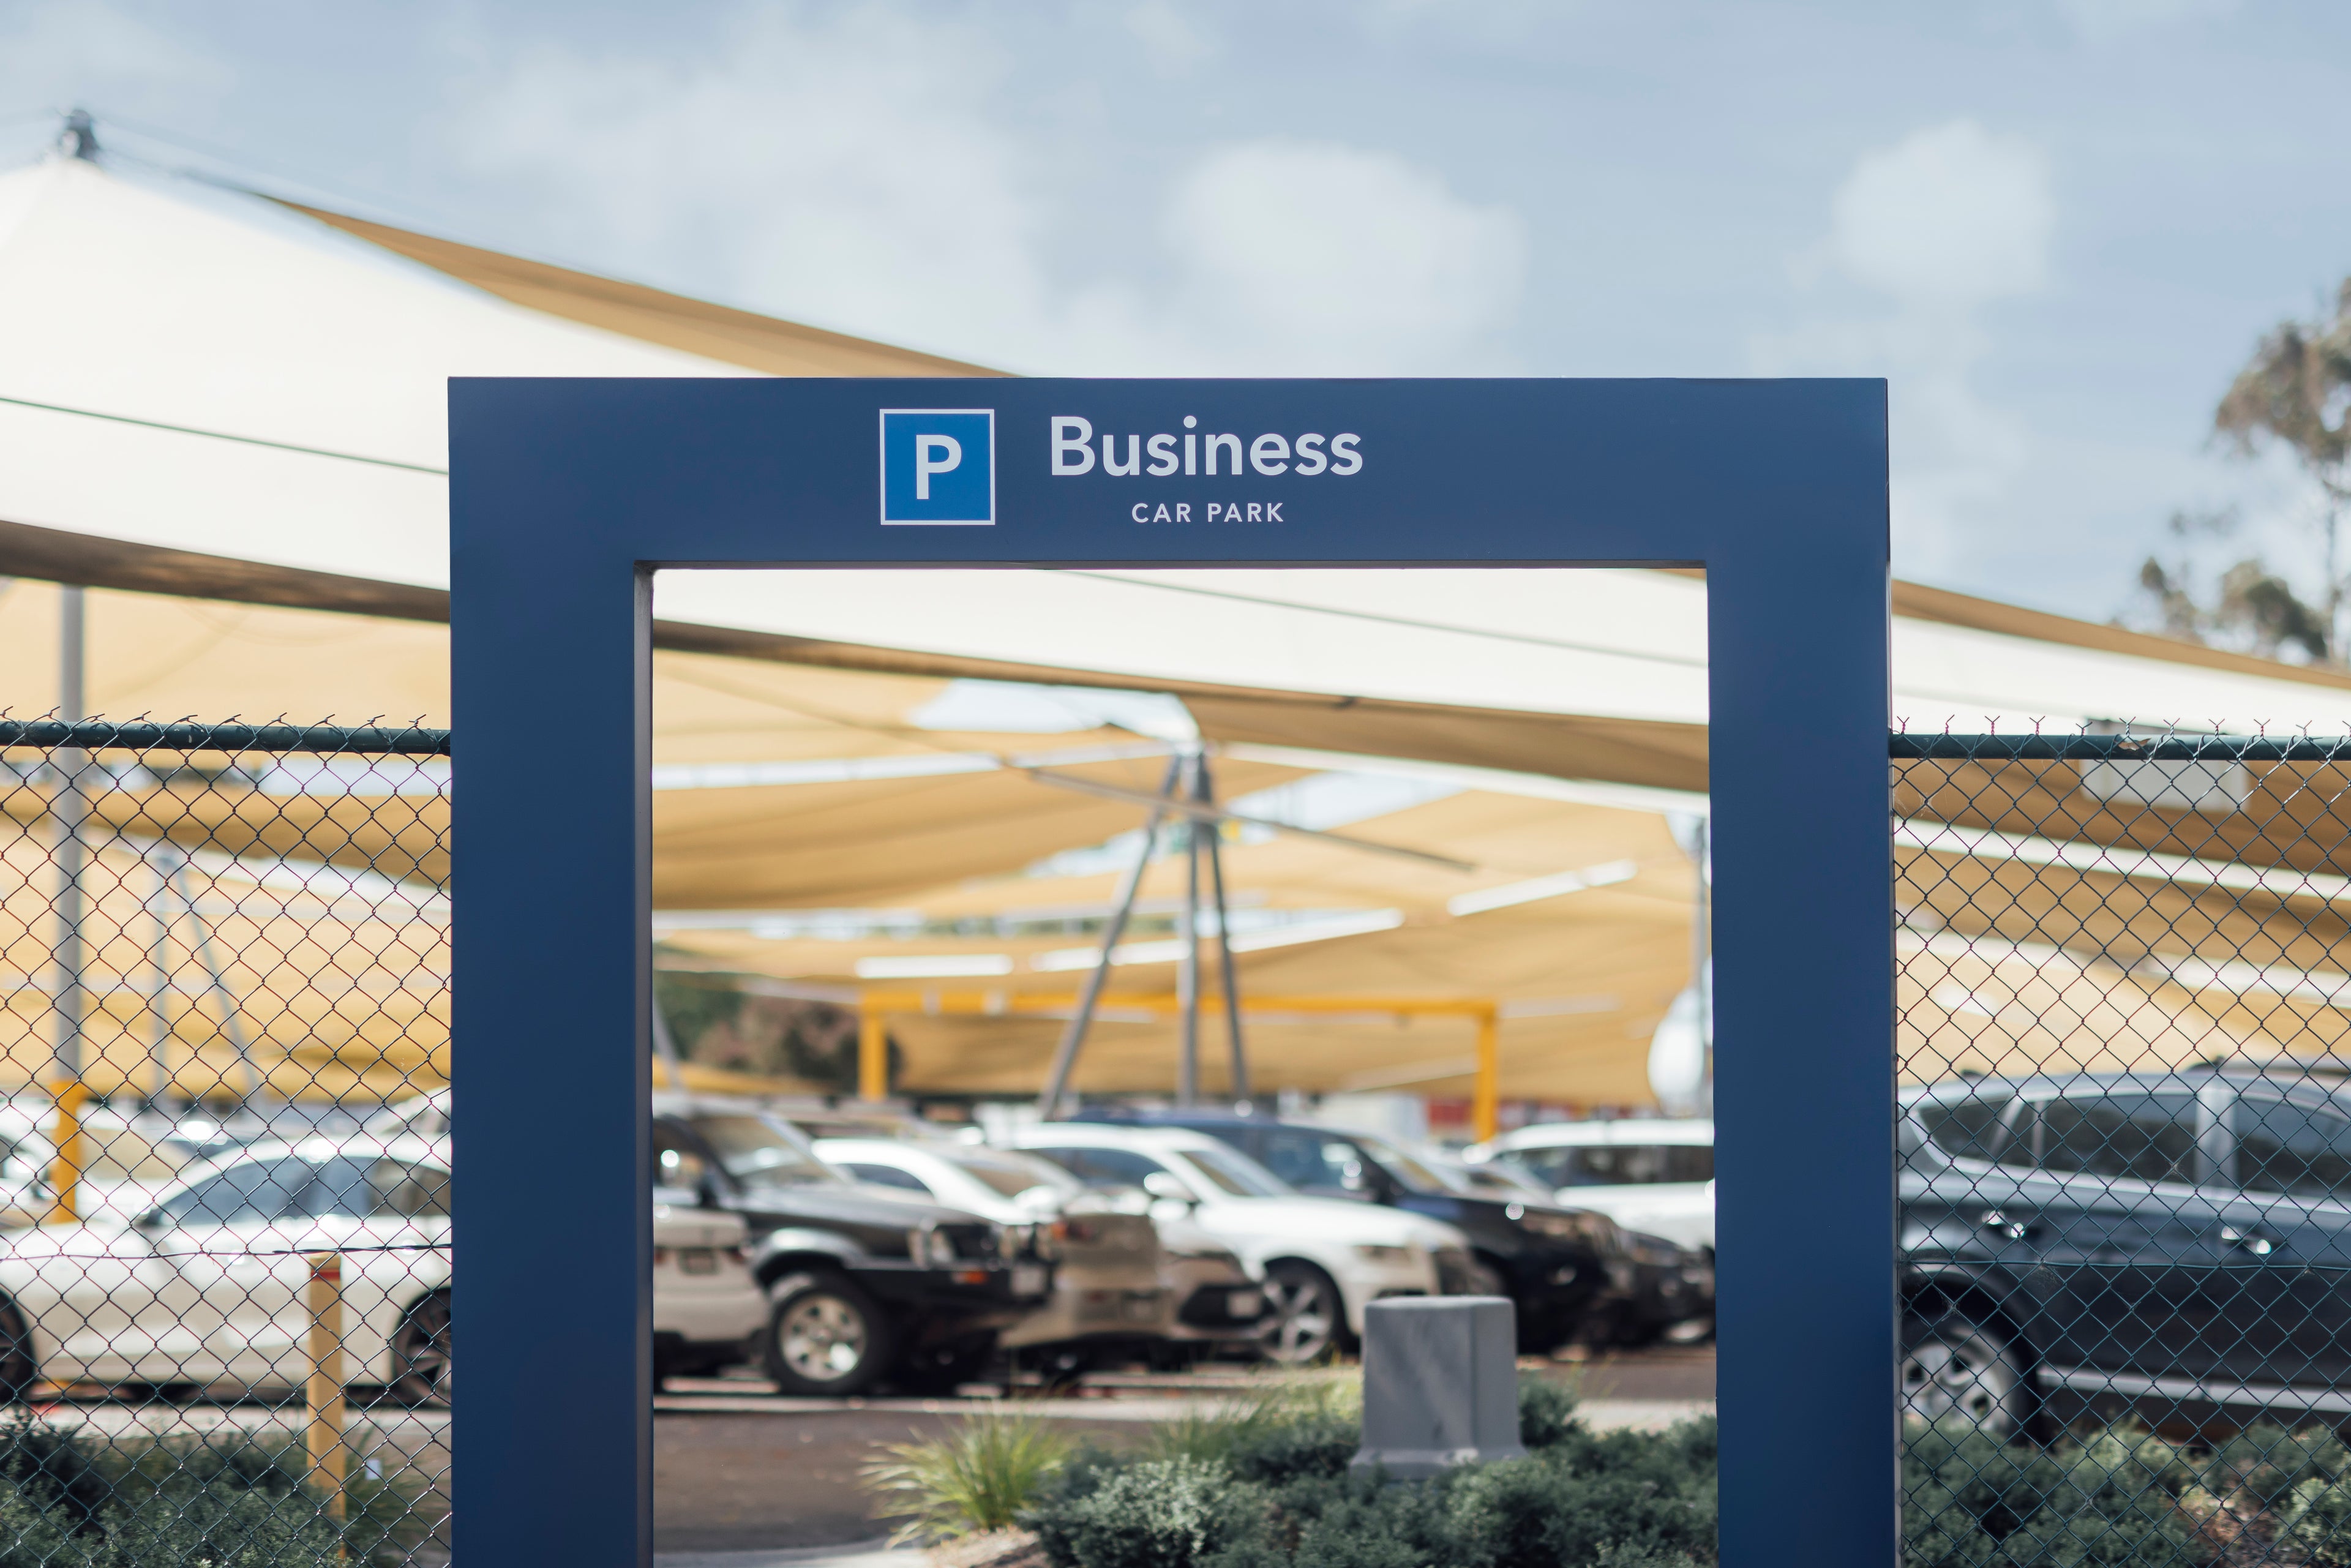 Our Business Car Park is located right opposite Terminal 1. Just a short stroll and you'll be at the terminal in no time. 